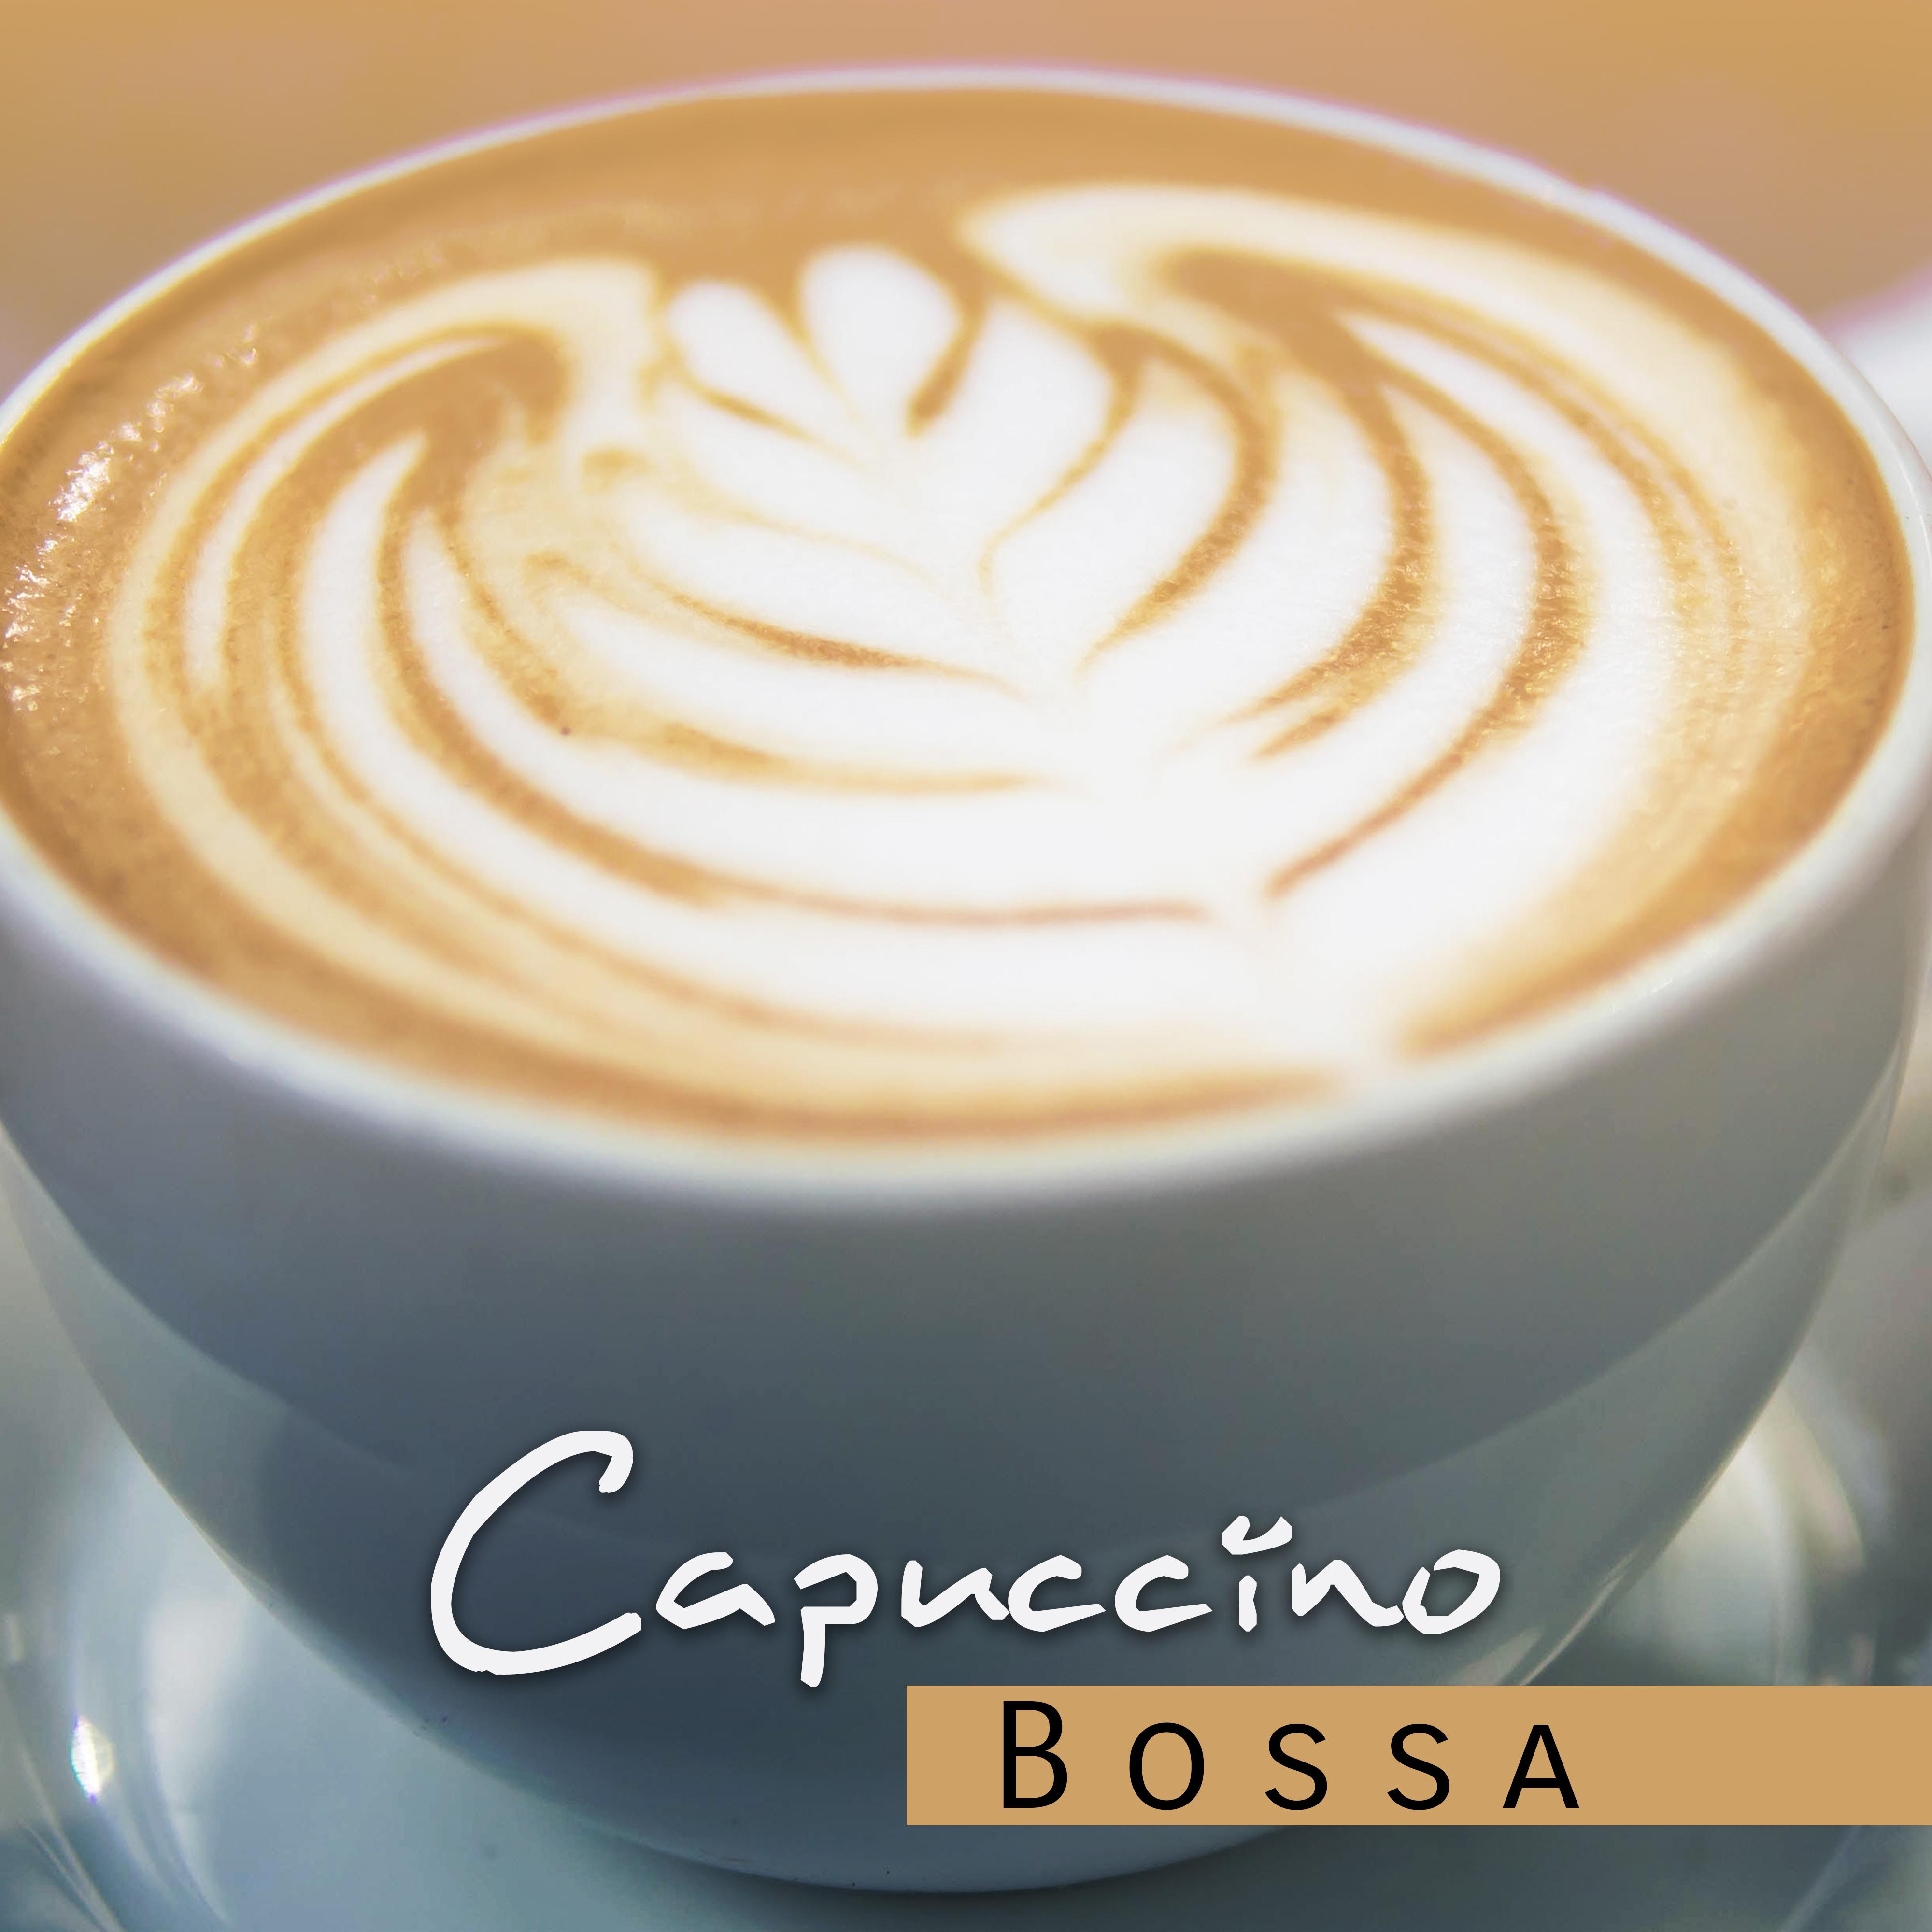 Capuccino Bossa  Soft Jazz Cafe, Piano Bar, Relaxing Time, Calm Down, Cocktail Party